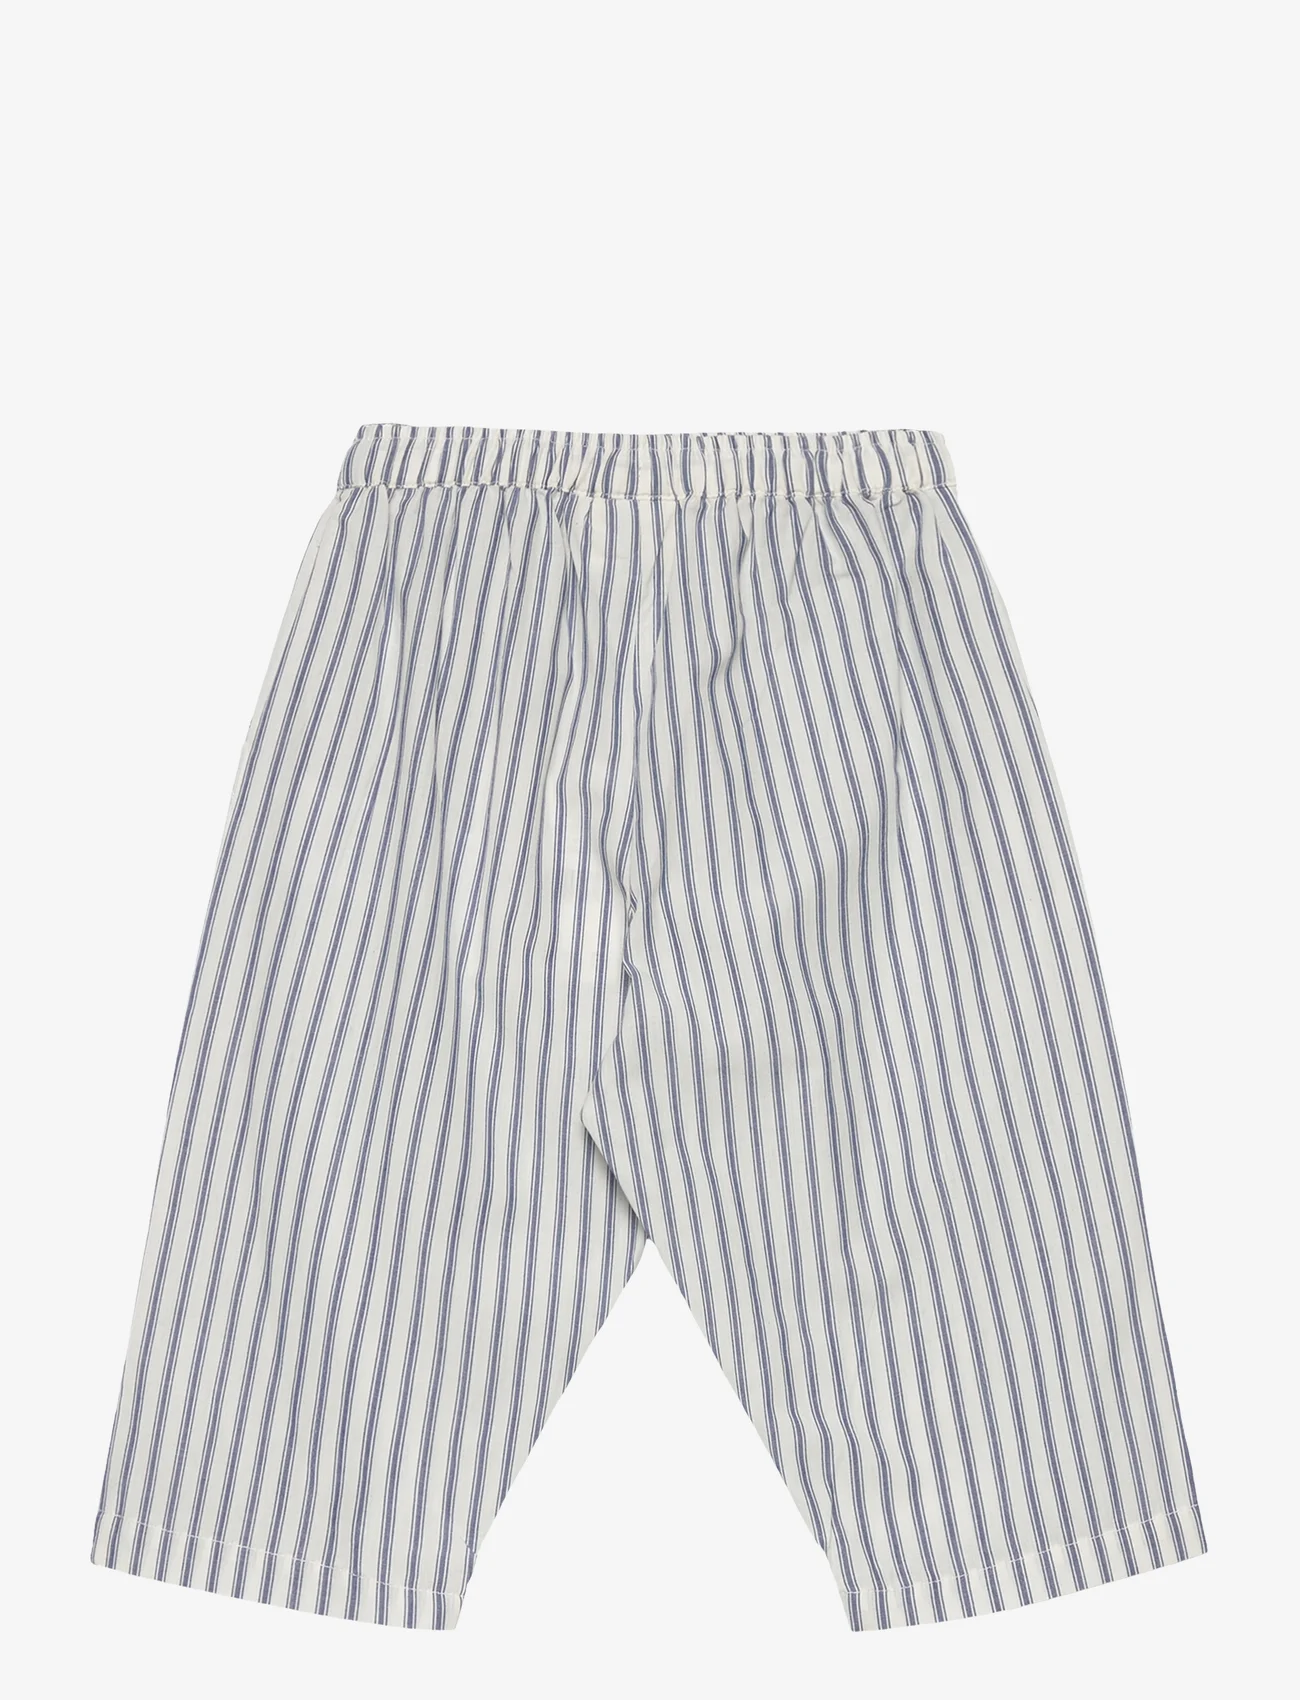 Sofie Schnoor Baby and Kids - Trousers - babybukser - blue striped - 1